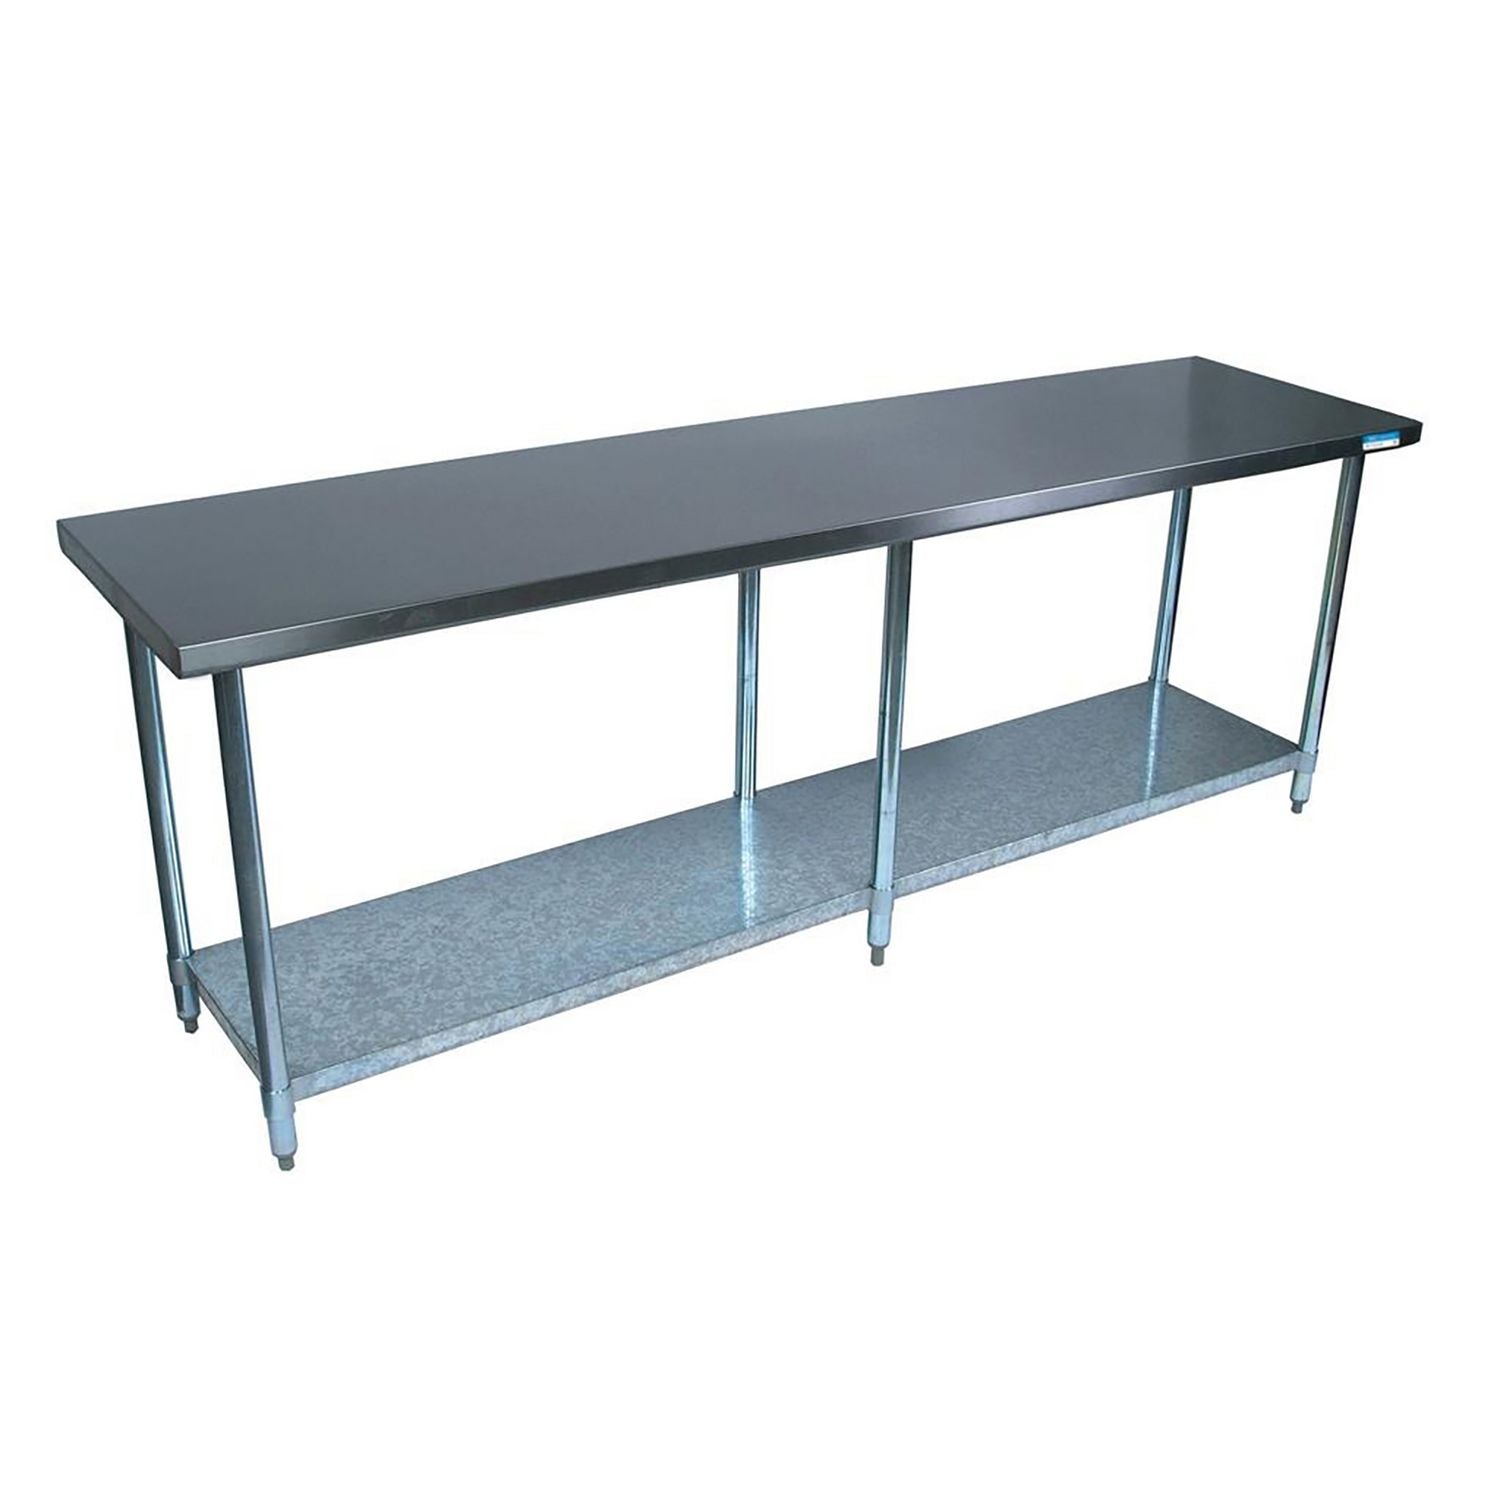 stainless-steel-flat-top-work-tables-96w-x-30d-x-36h-silver-2-pallet-ships-in-4-6-business-days_bke2vt9630 - 2